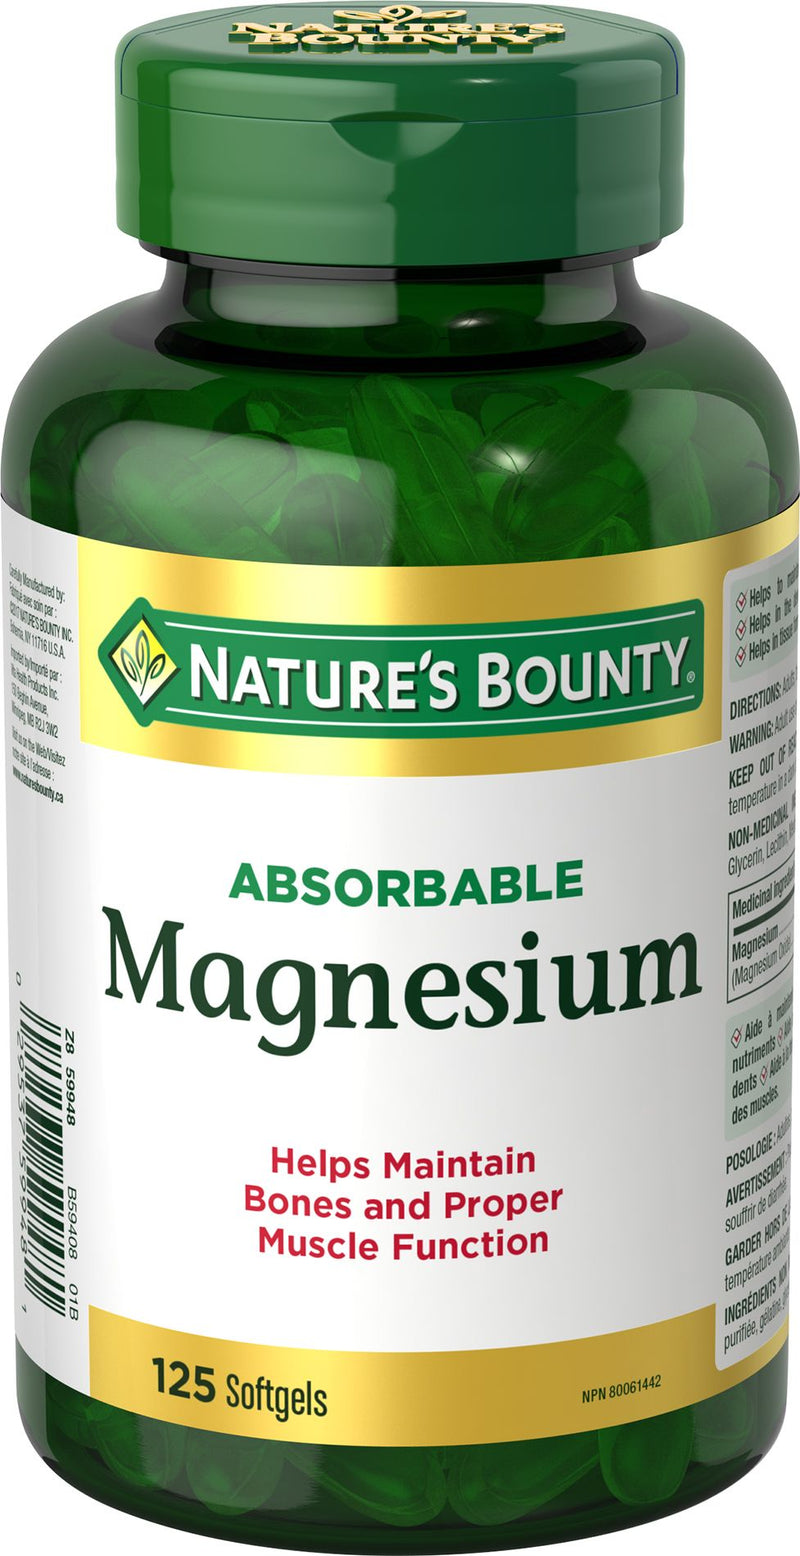 Nature's Bounty Absorbable Magnesium Softgels